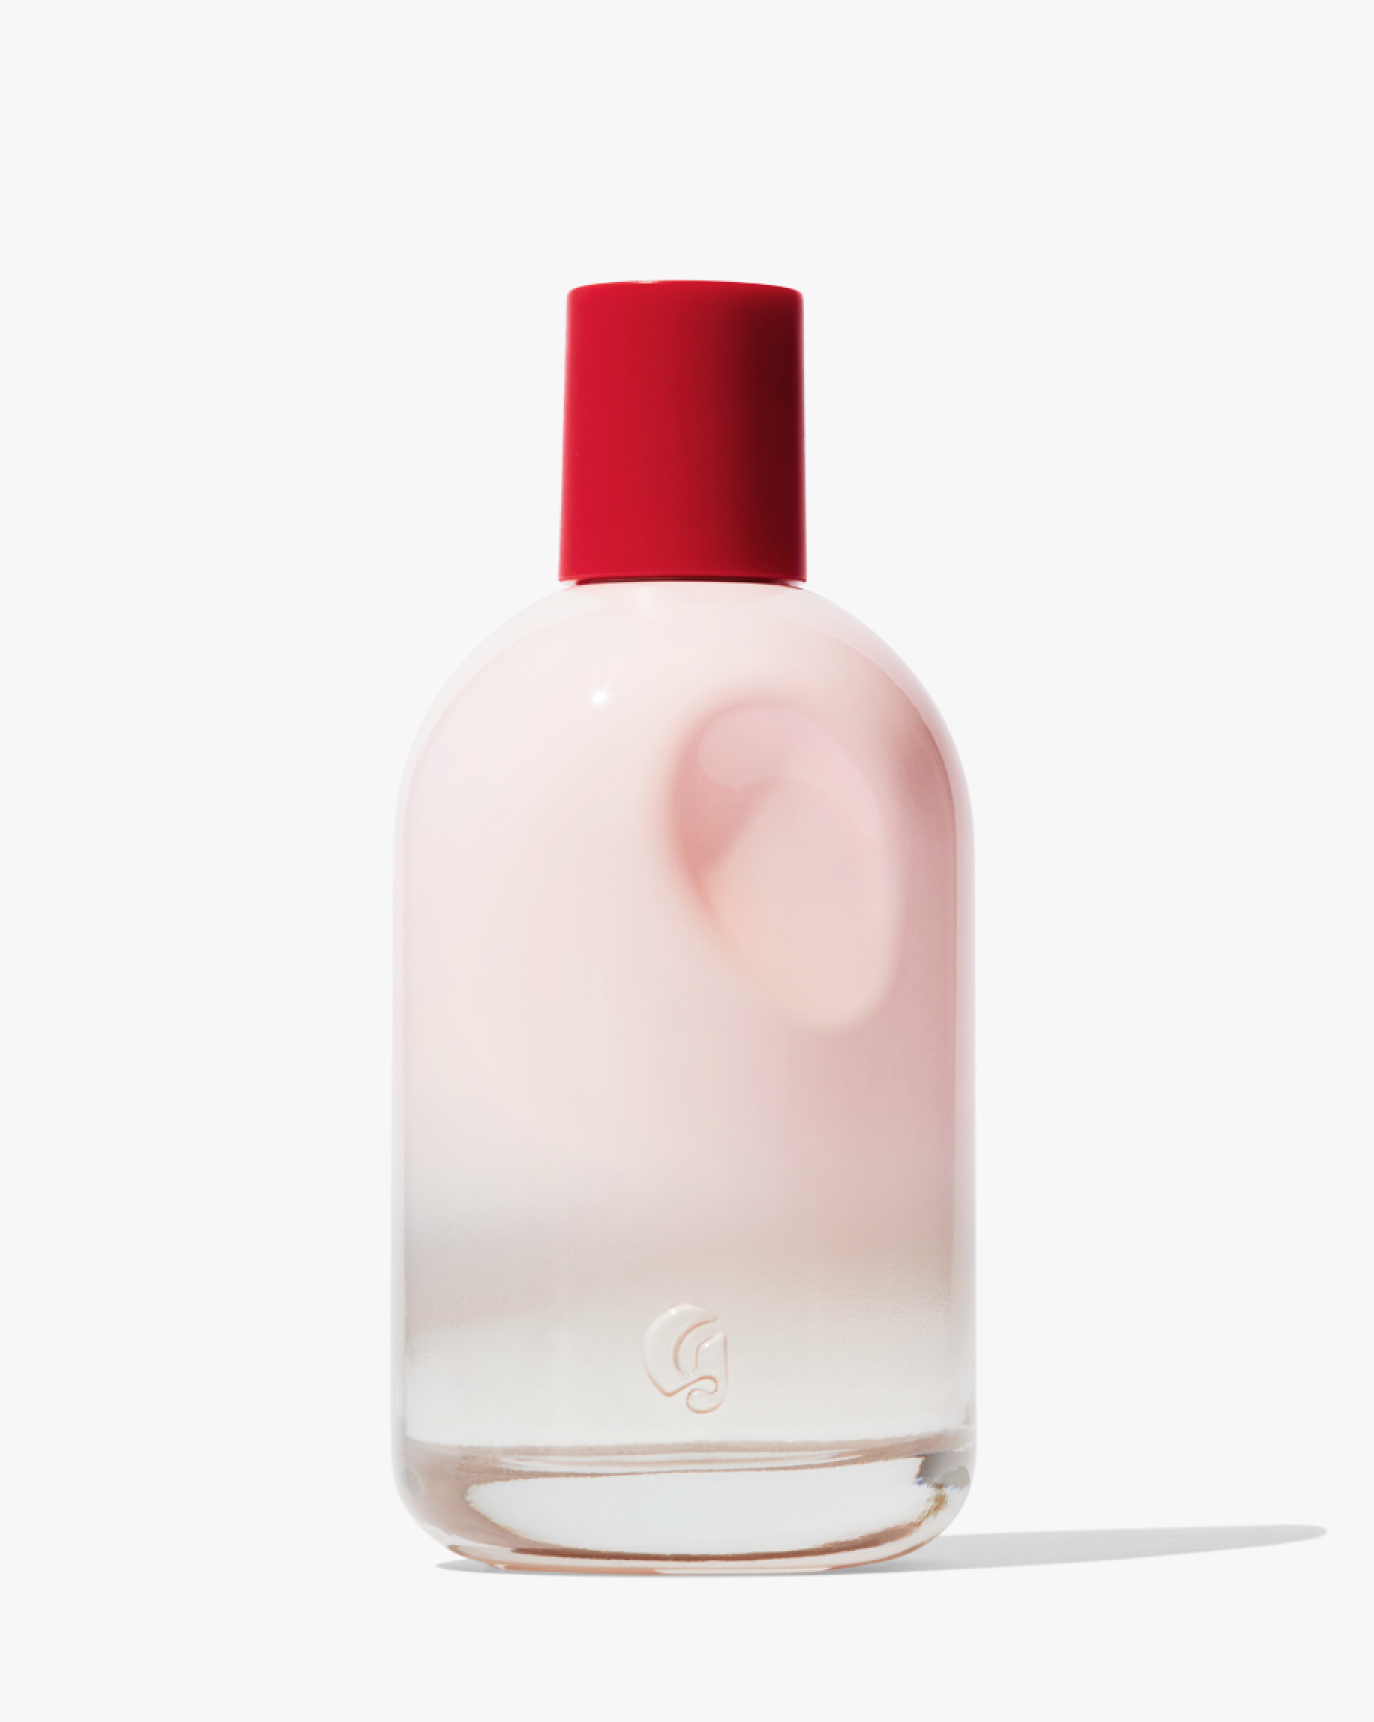 Glossier You The ultimate personal fragrance 1.7 fl oz/50 ml 